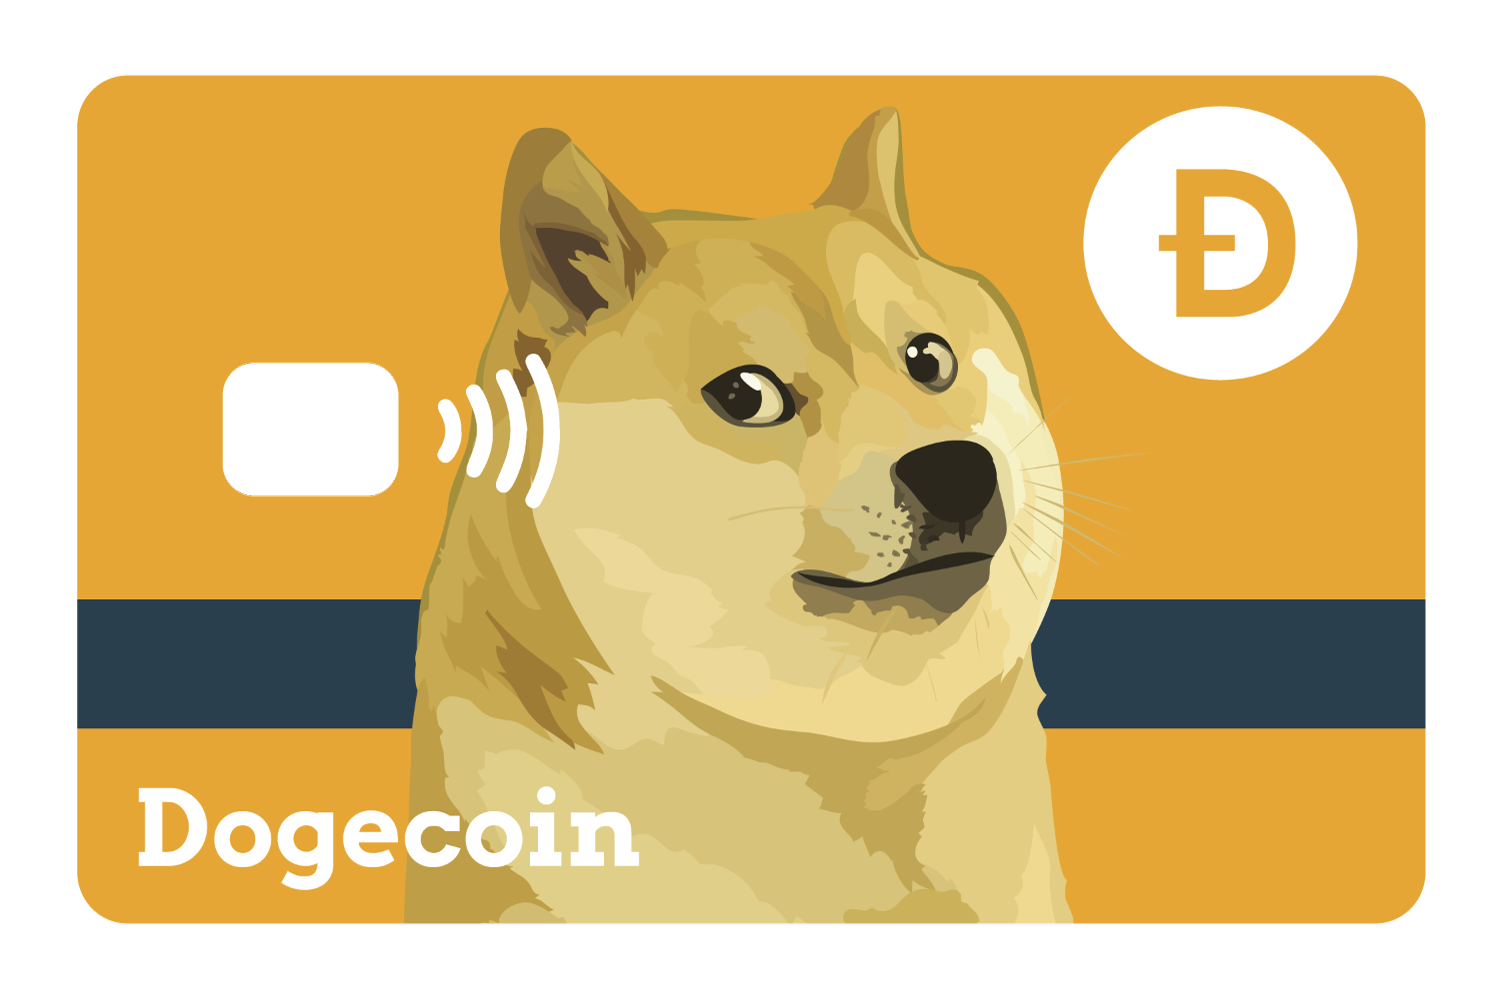 Picture of a Dogecoin payment card